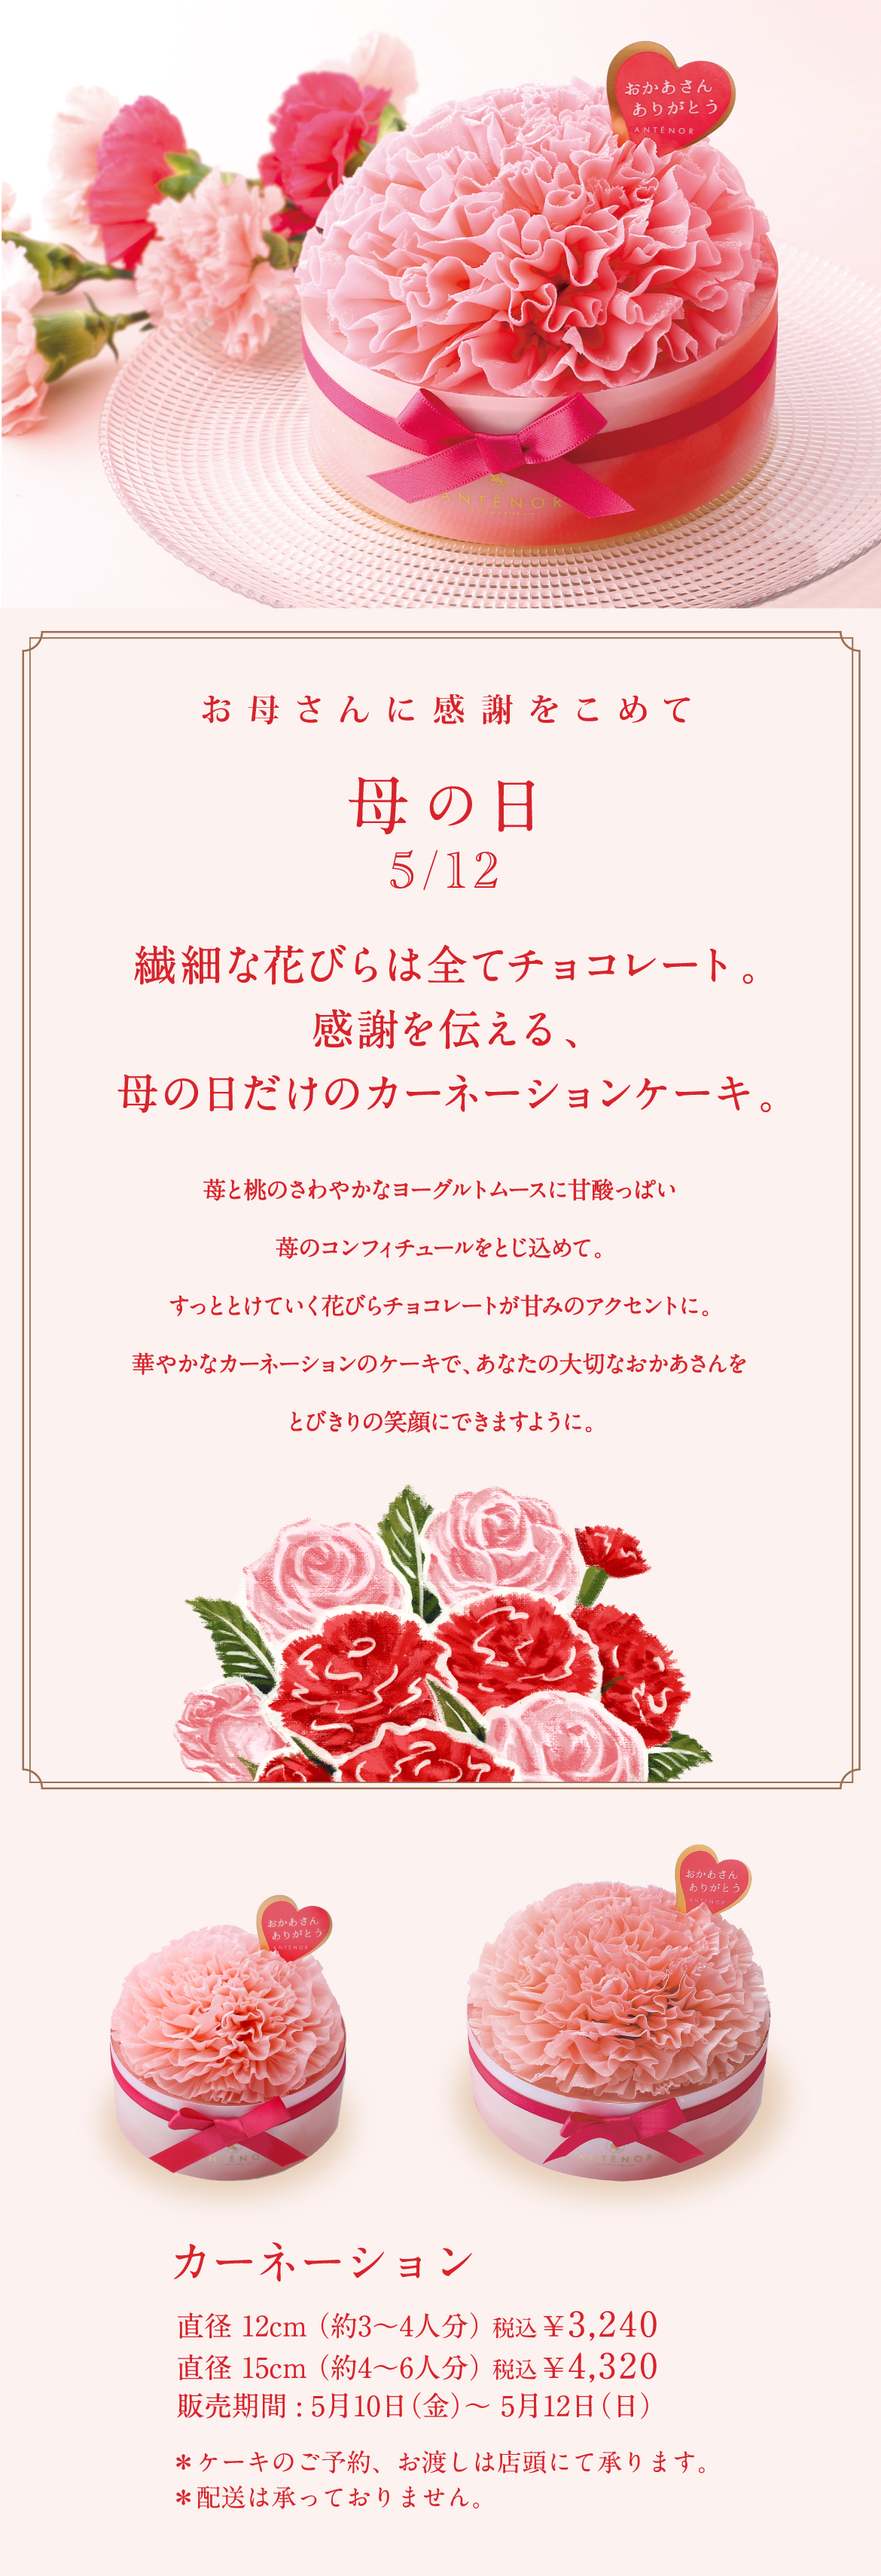 MOTHER'S DAY 5.12 母の日に贈るケーキ カーネーション